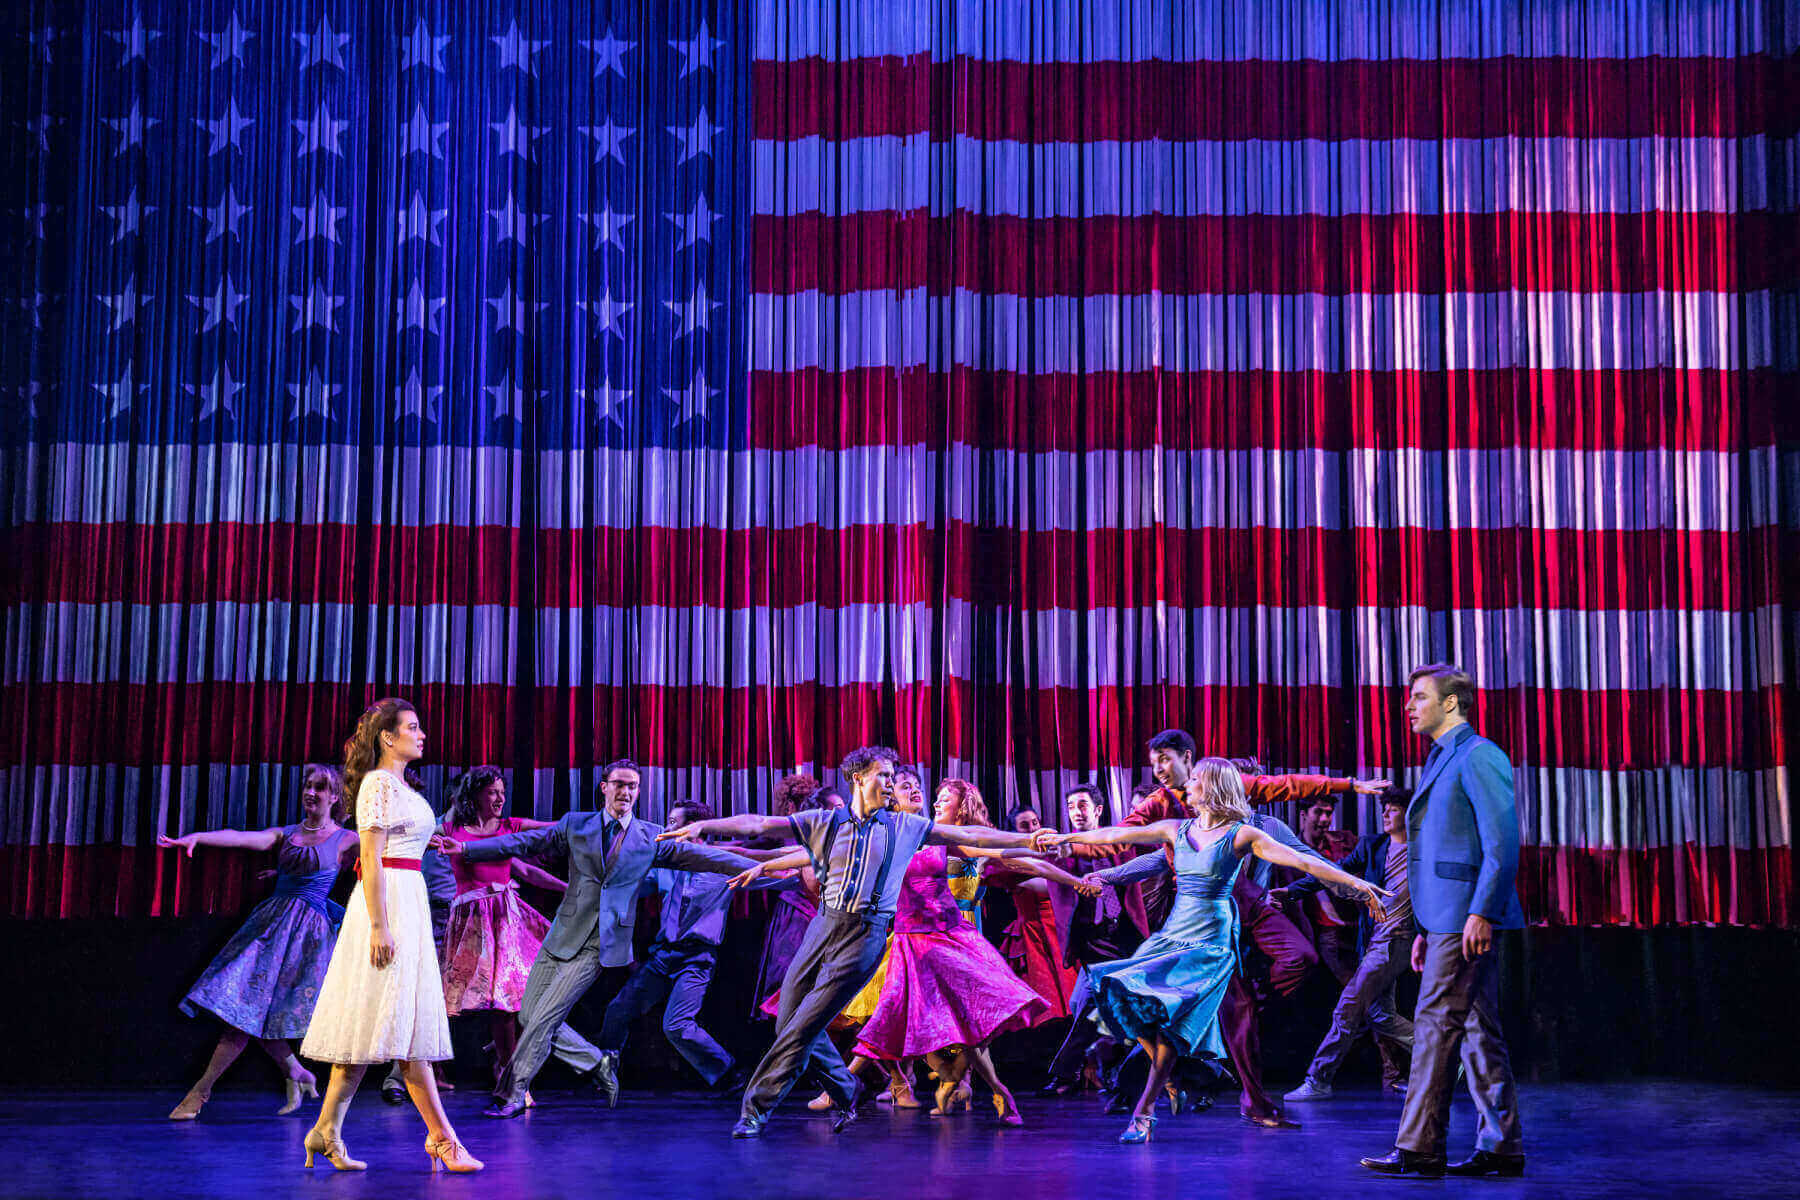 Dance scene with an American flag in the background